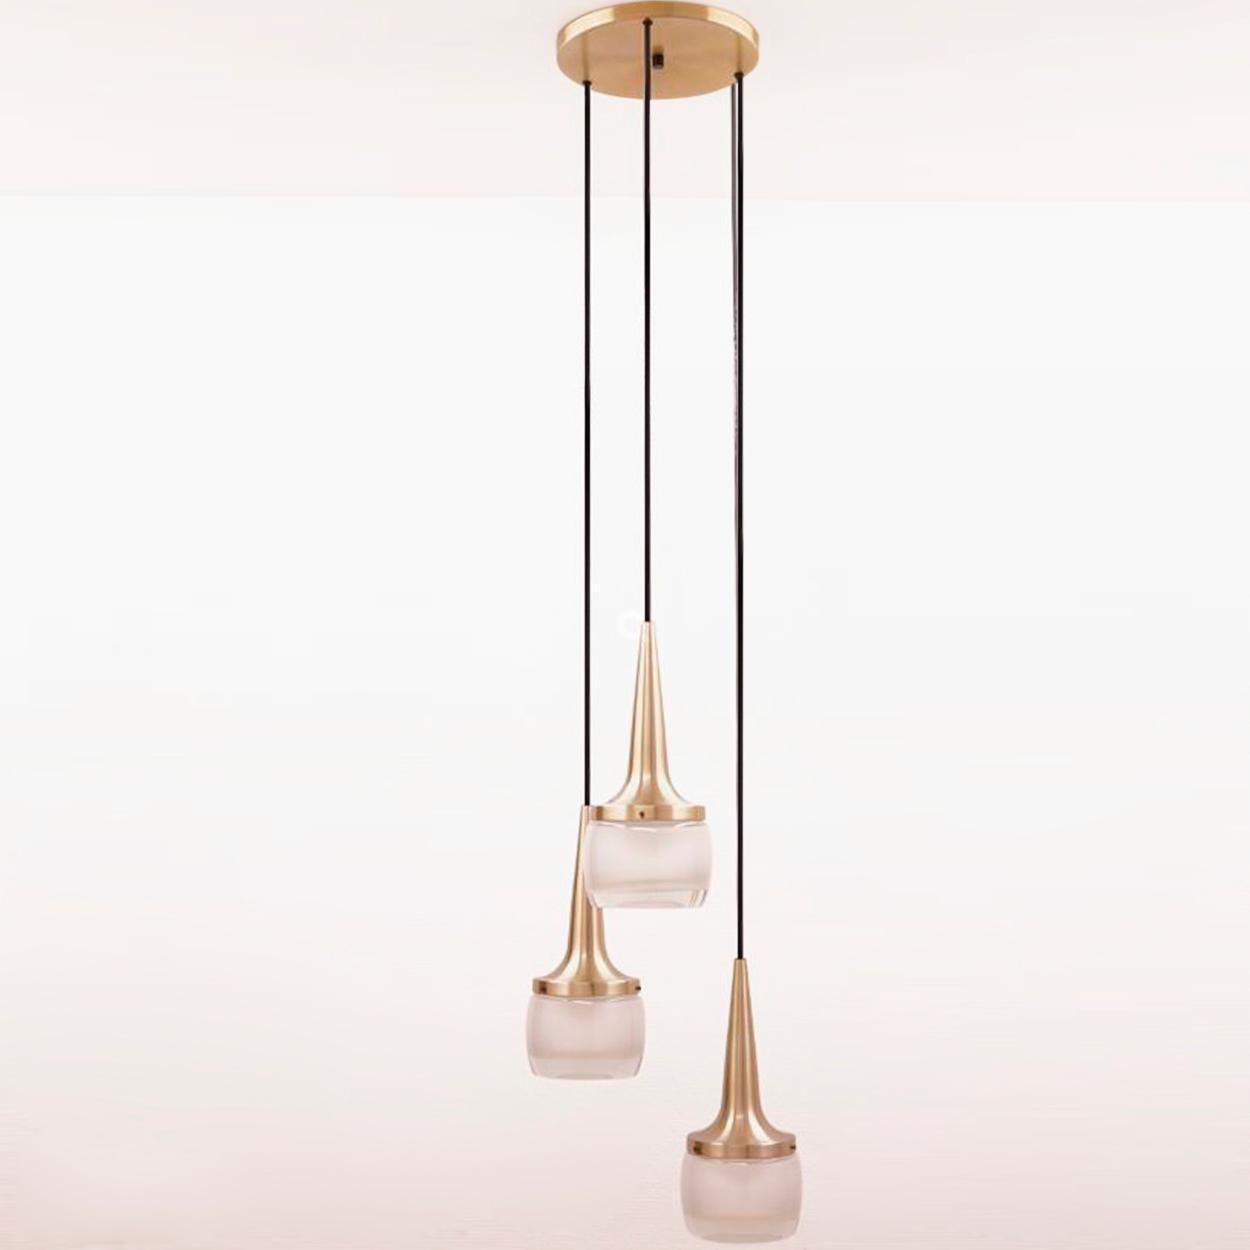 This elegant cascade light was manufactured by Staff Leuchten in Germany. The light is executed in brassed aluminium and thick opaline molded glass etched on the inside. Each individual pendant measures: 13.5 in. H x 5.25 in. D. 

Dimensions